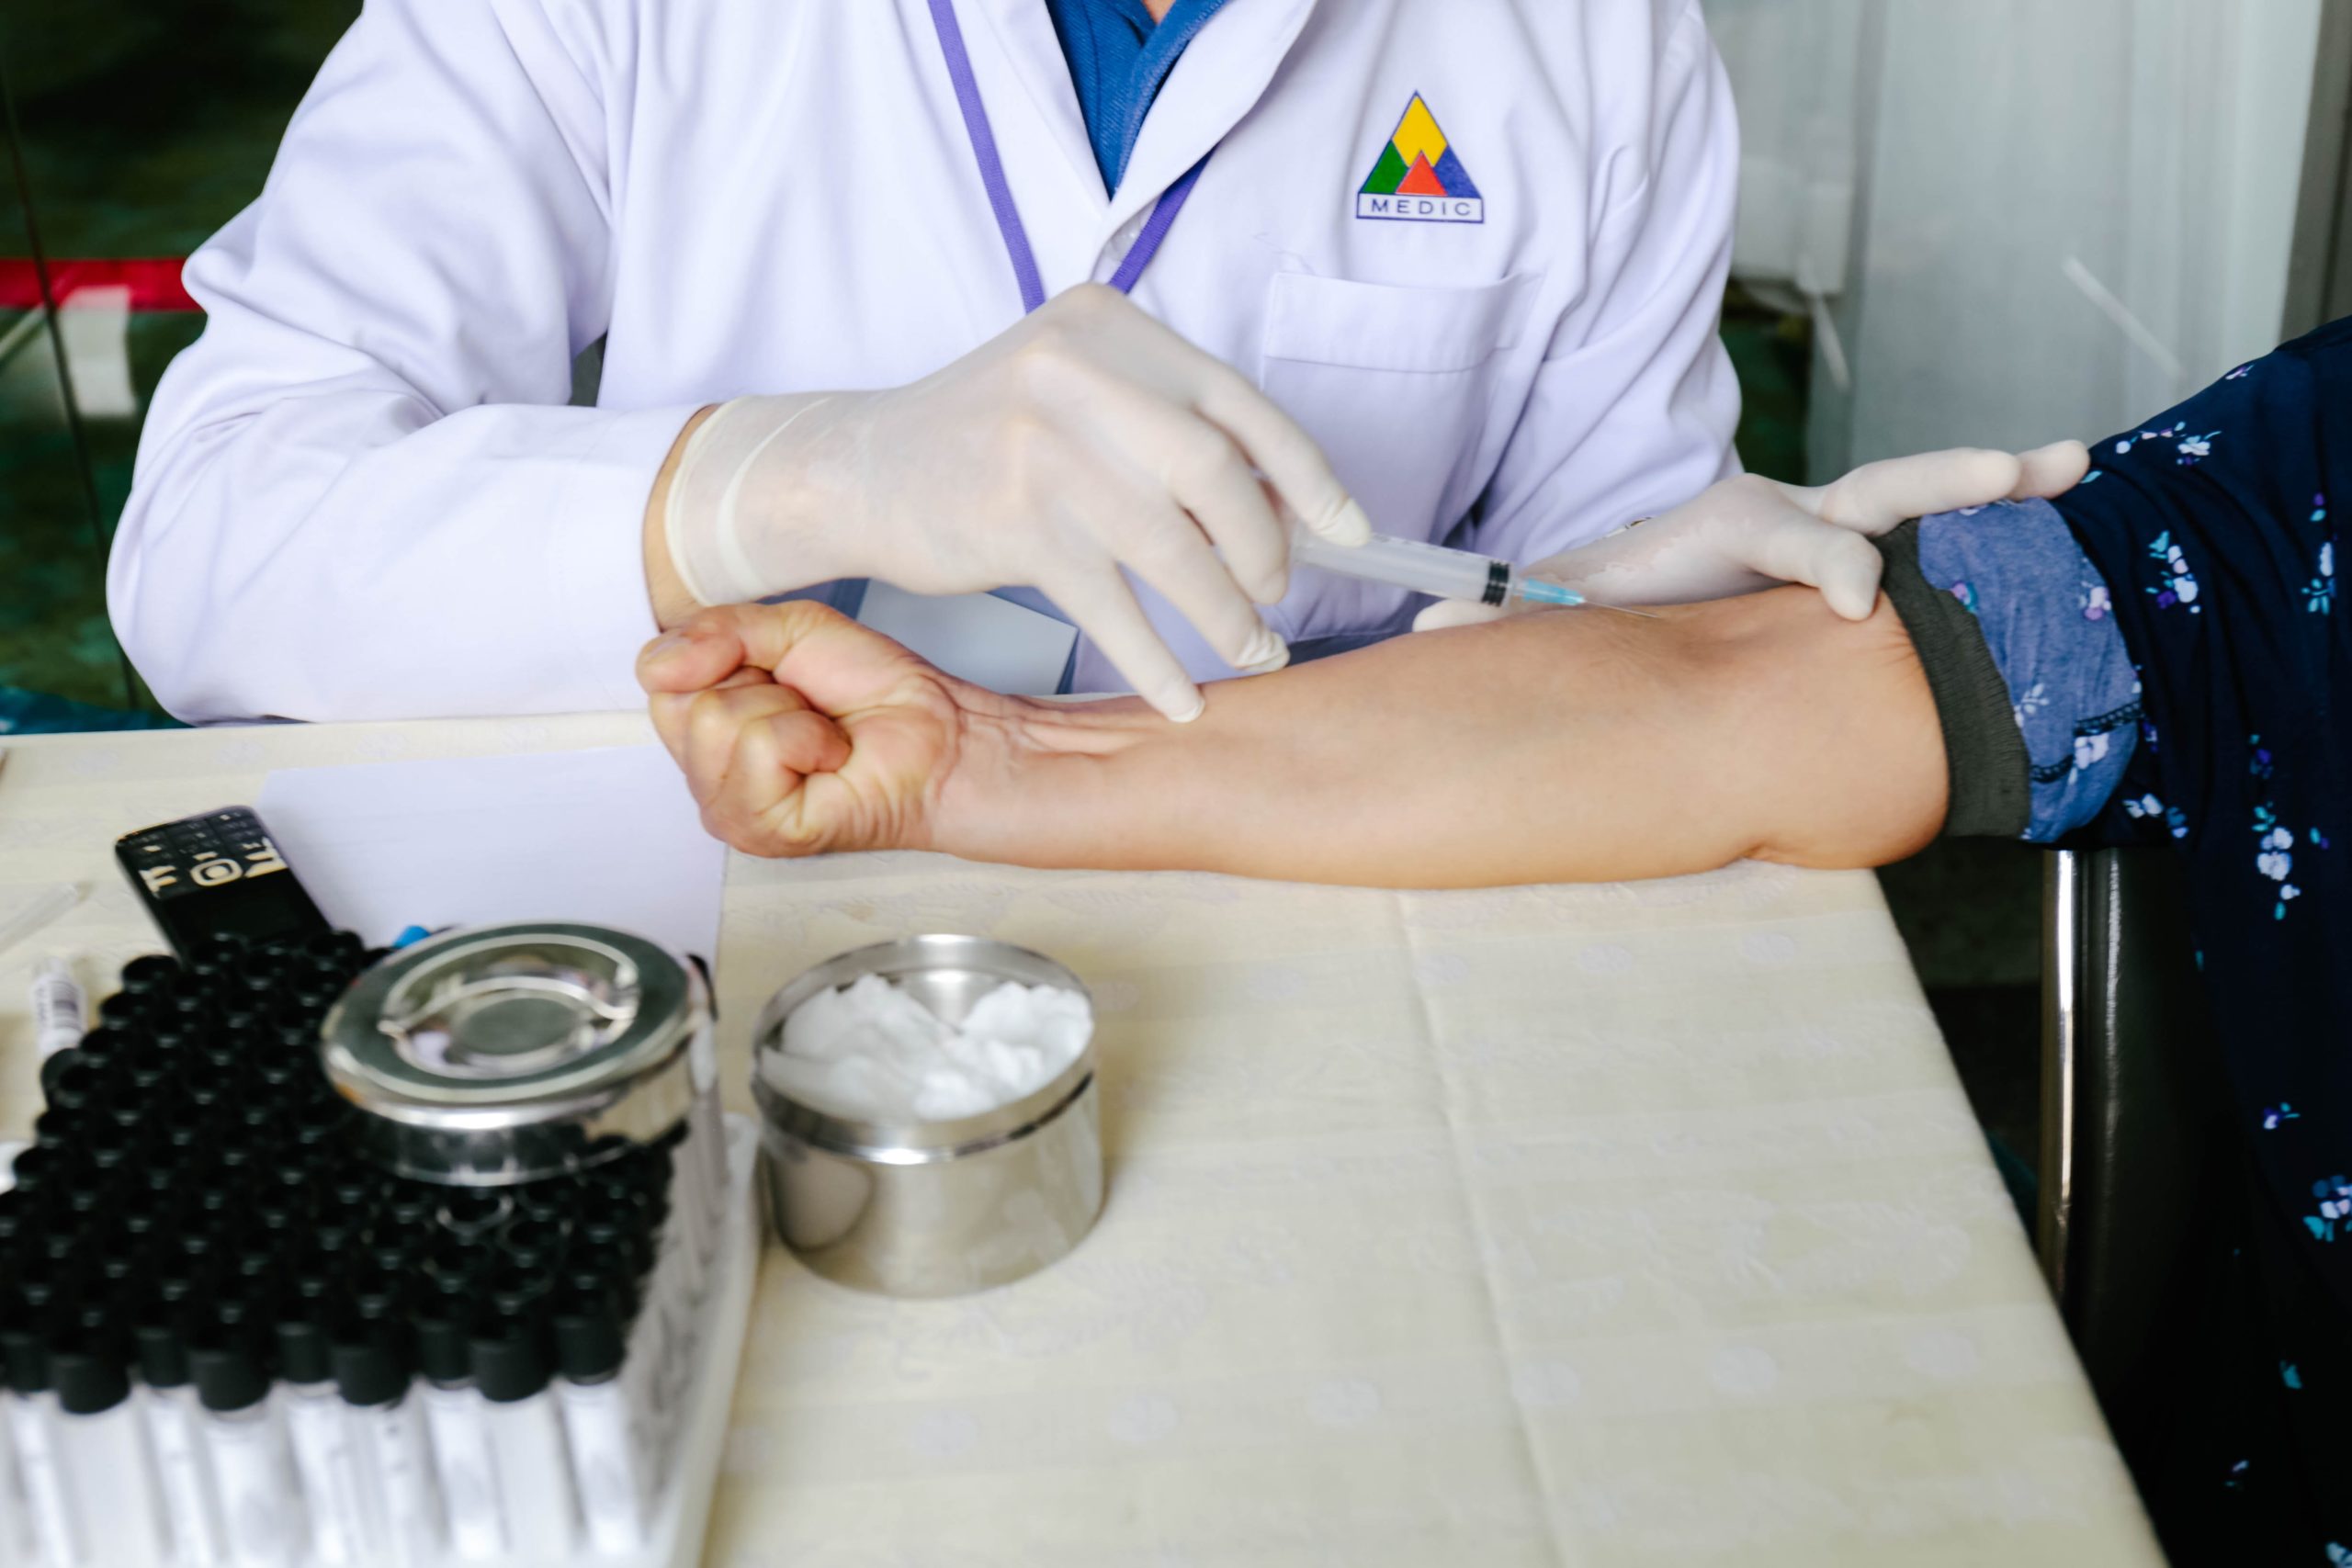 A doctor in a white coat administering a shot to someone’s forearm.